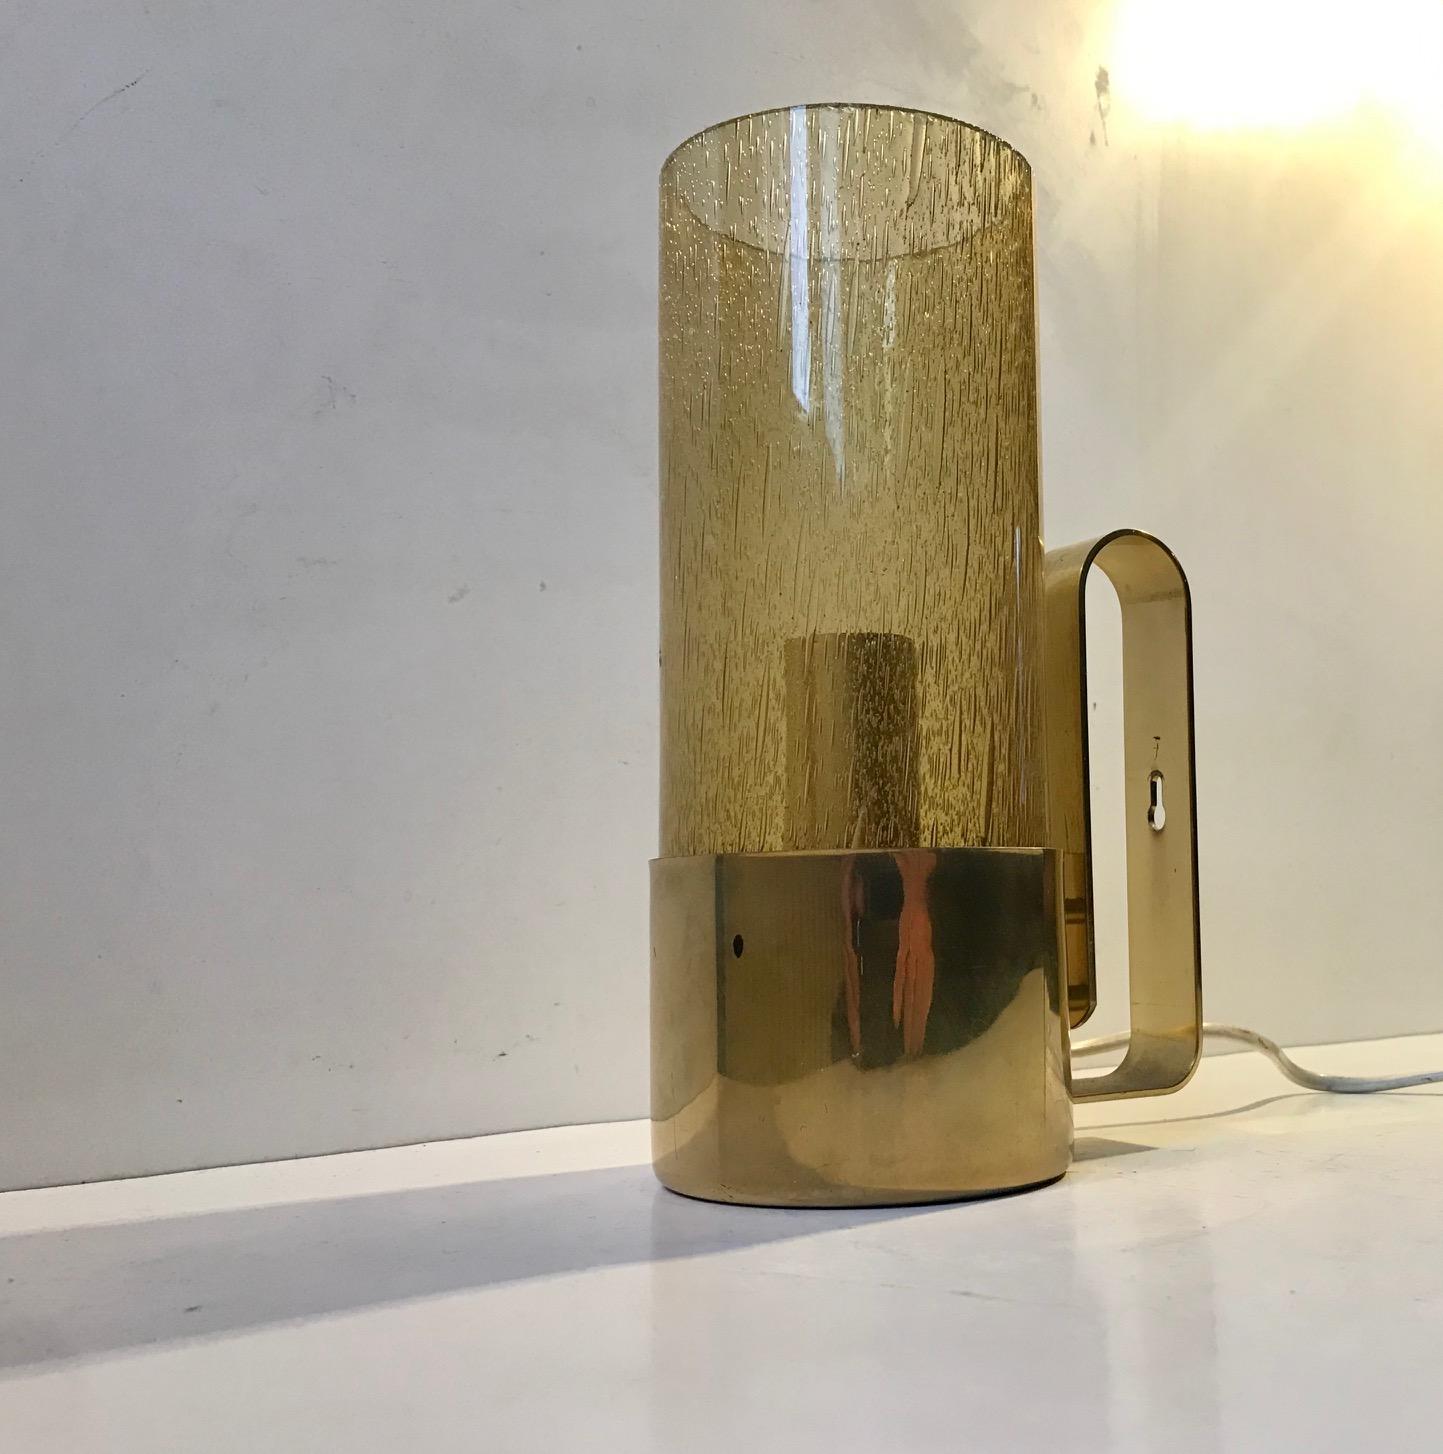 A small (Measure: H 22cm) practical table light made from brass and smoked blister glass. Designed and manufactured by Nya Ôia in Sweden during the late 1960s or early 70s. It can also be hung as a wall lamp.